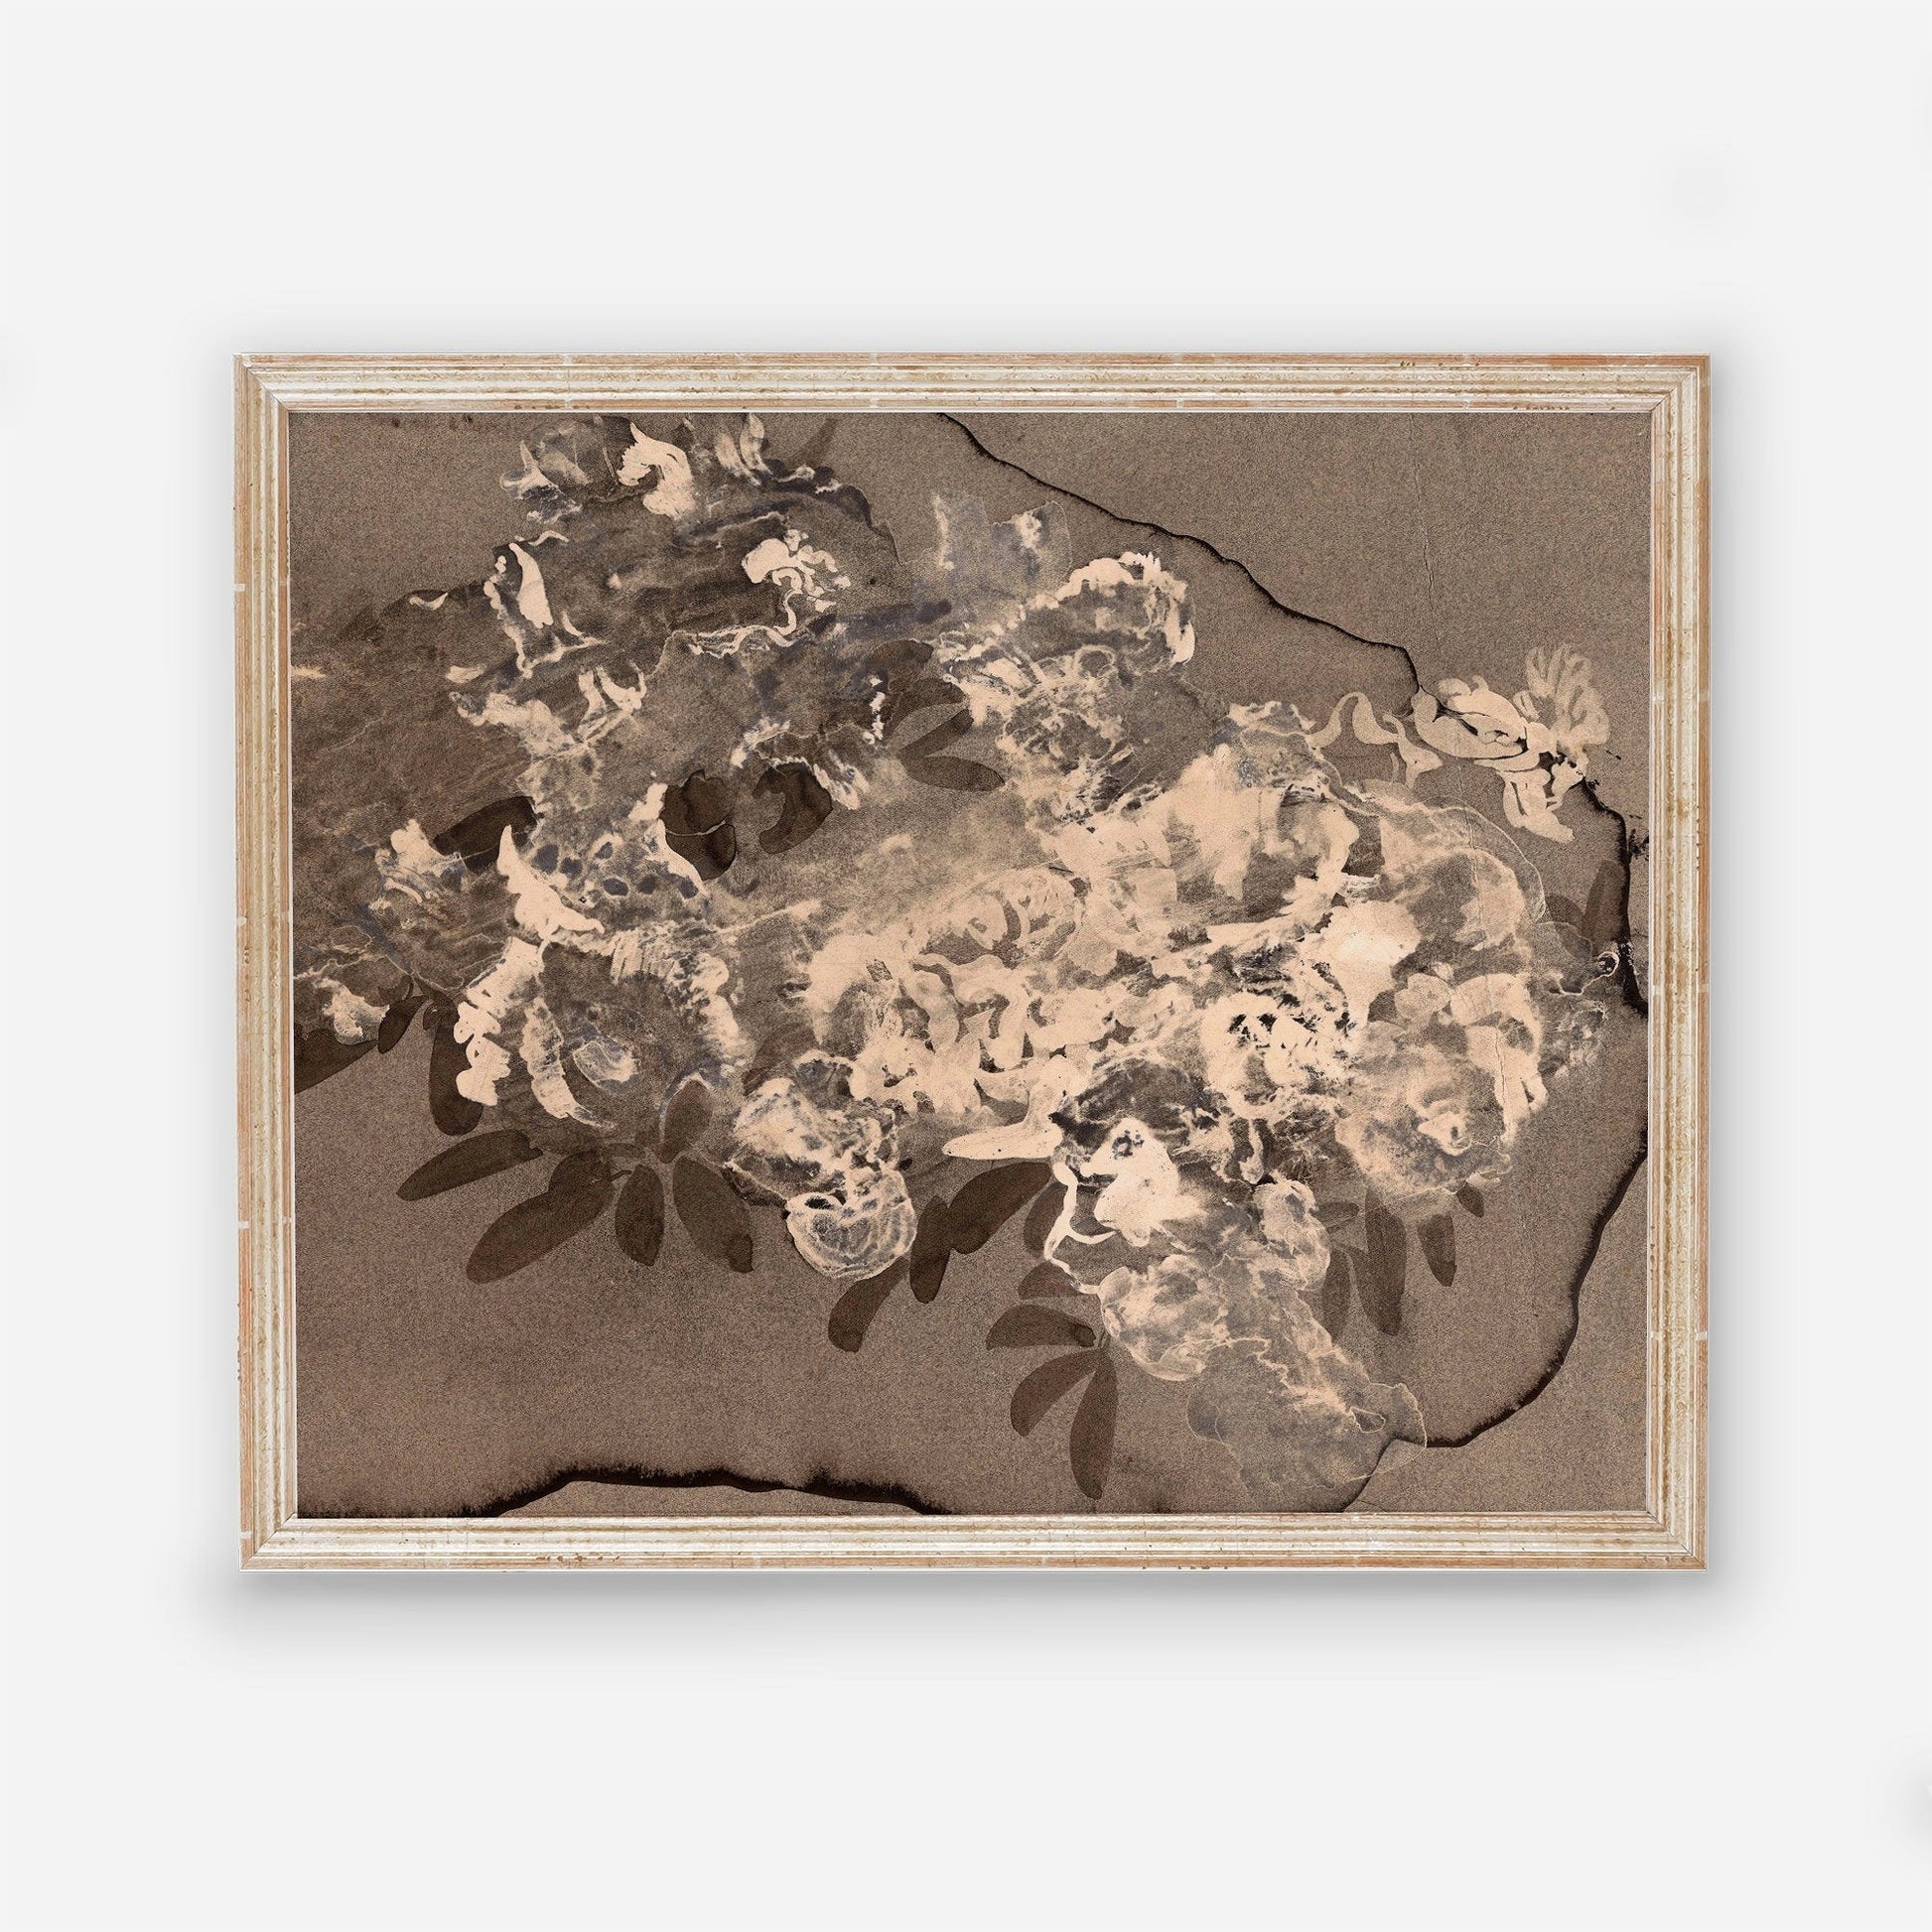 Messy Flower Vintage Floral Wall Art - Dark Modern Bedroom Flowers Wall Prints - Printed and Shipped Reproduction -